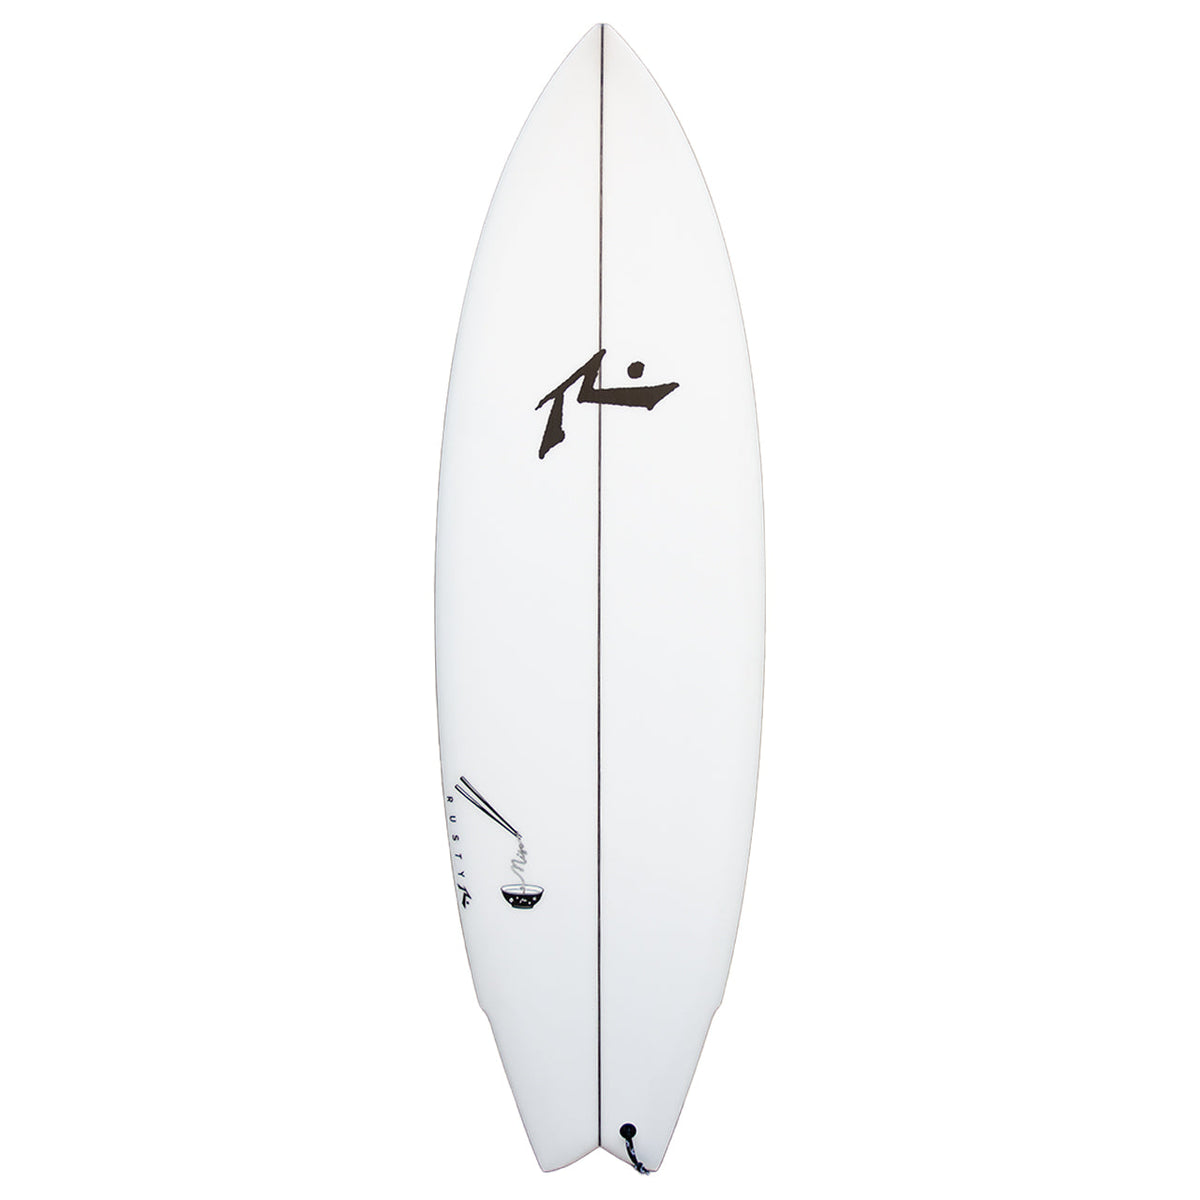 Miso - High Performance - Rusty Surfboards - Top View